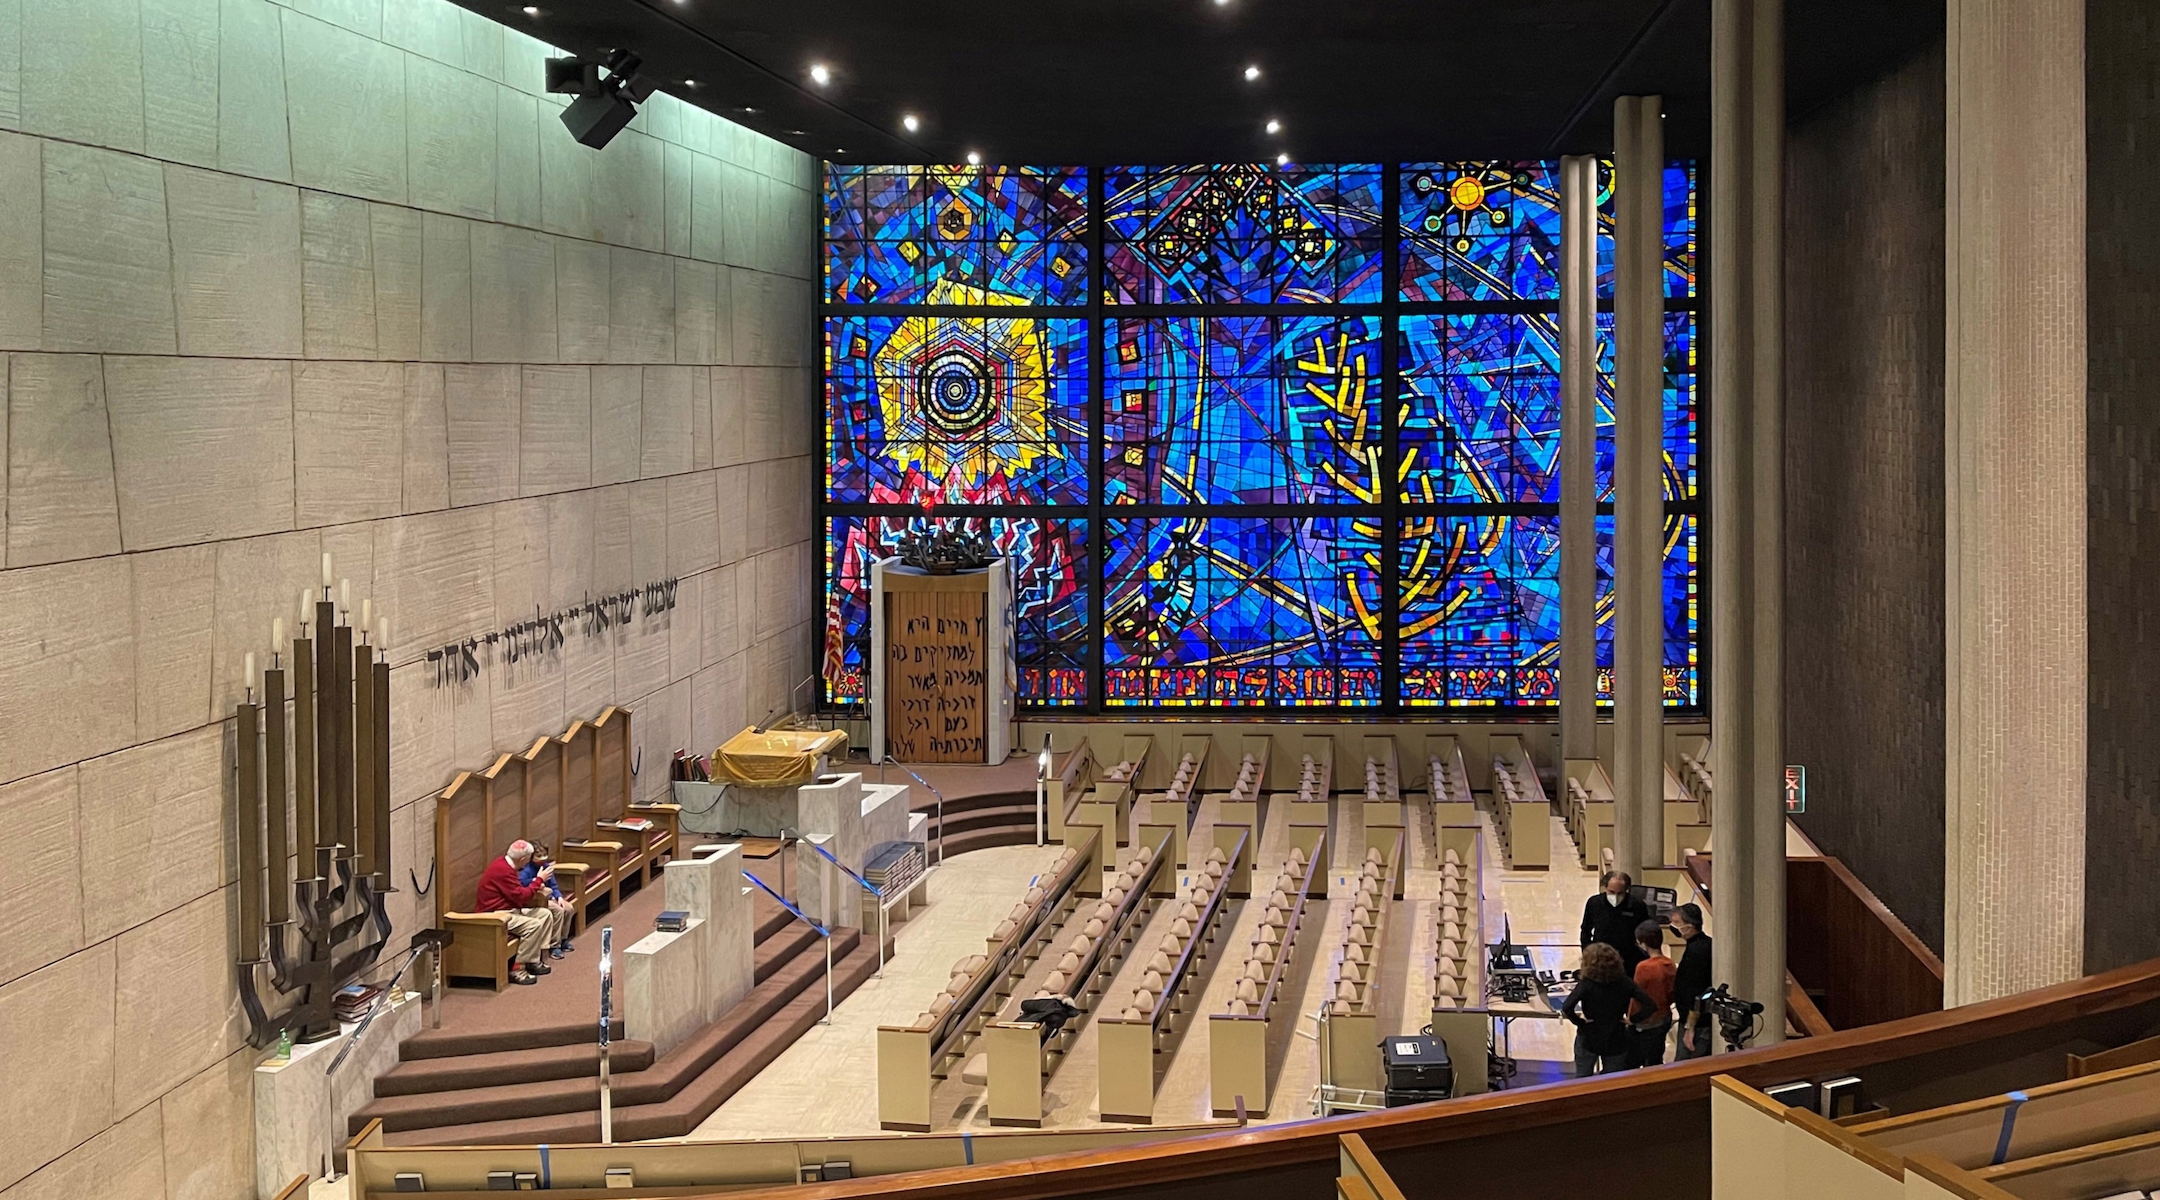 The expansive interior of the Chicago Loop Synagogue is conducive to social distancing. (Paul Harding/FAIA)